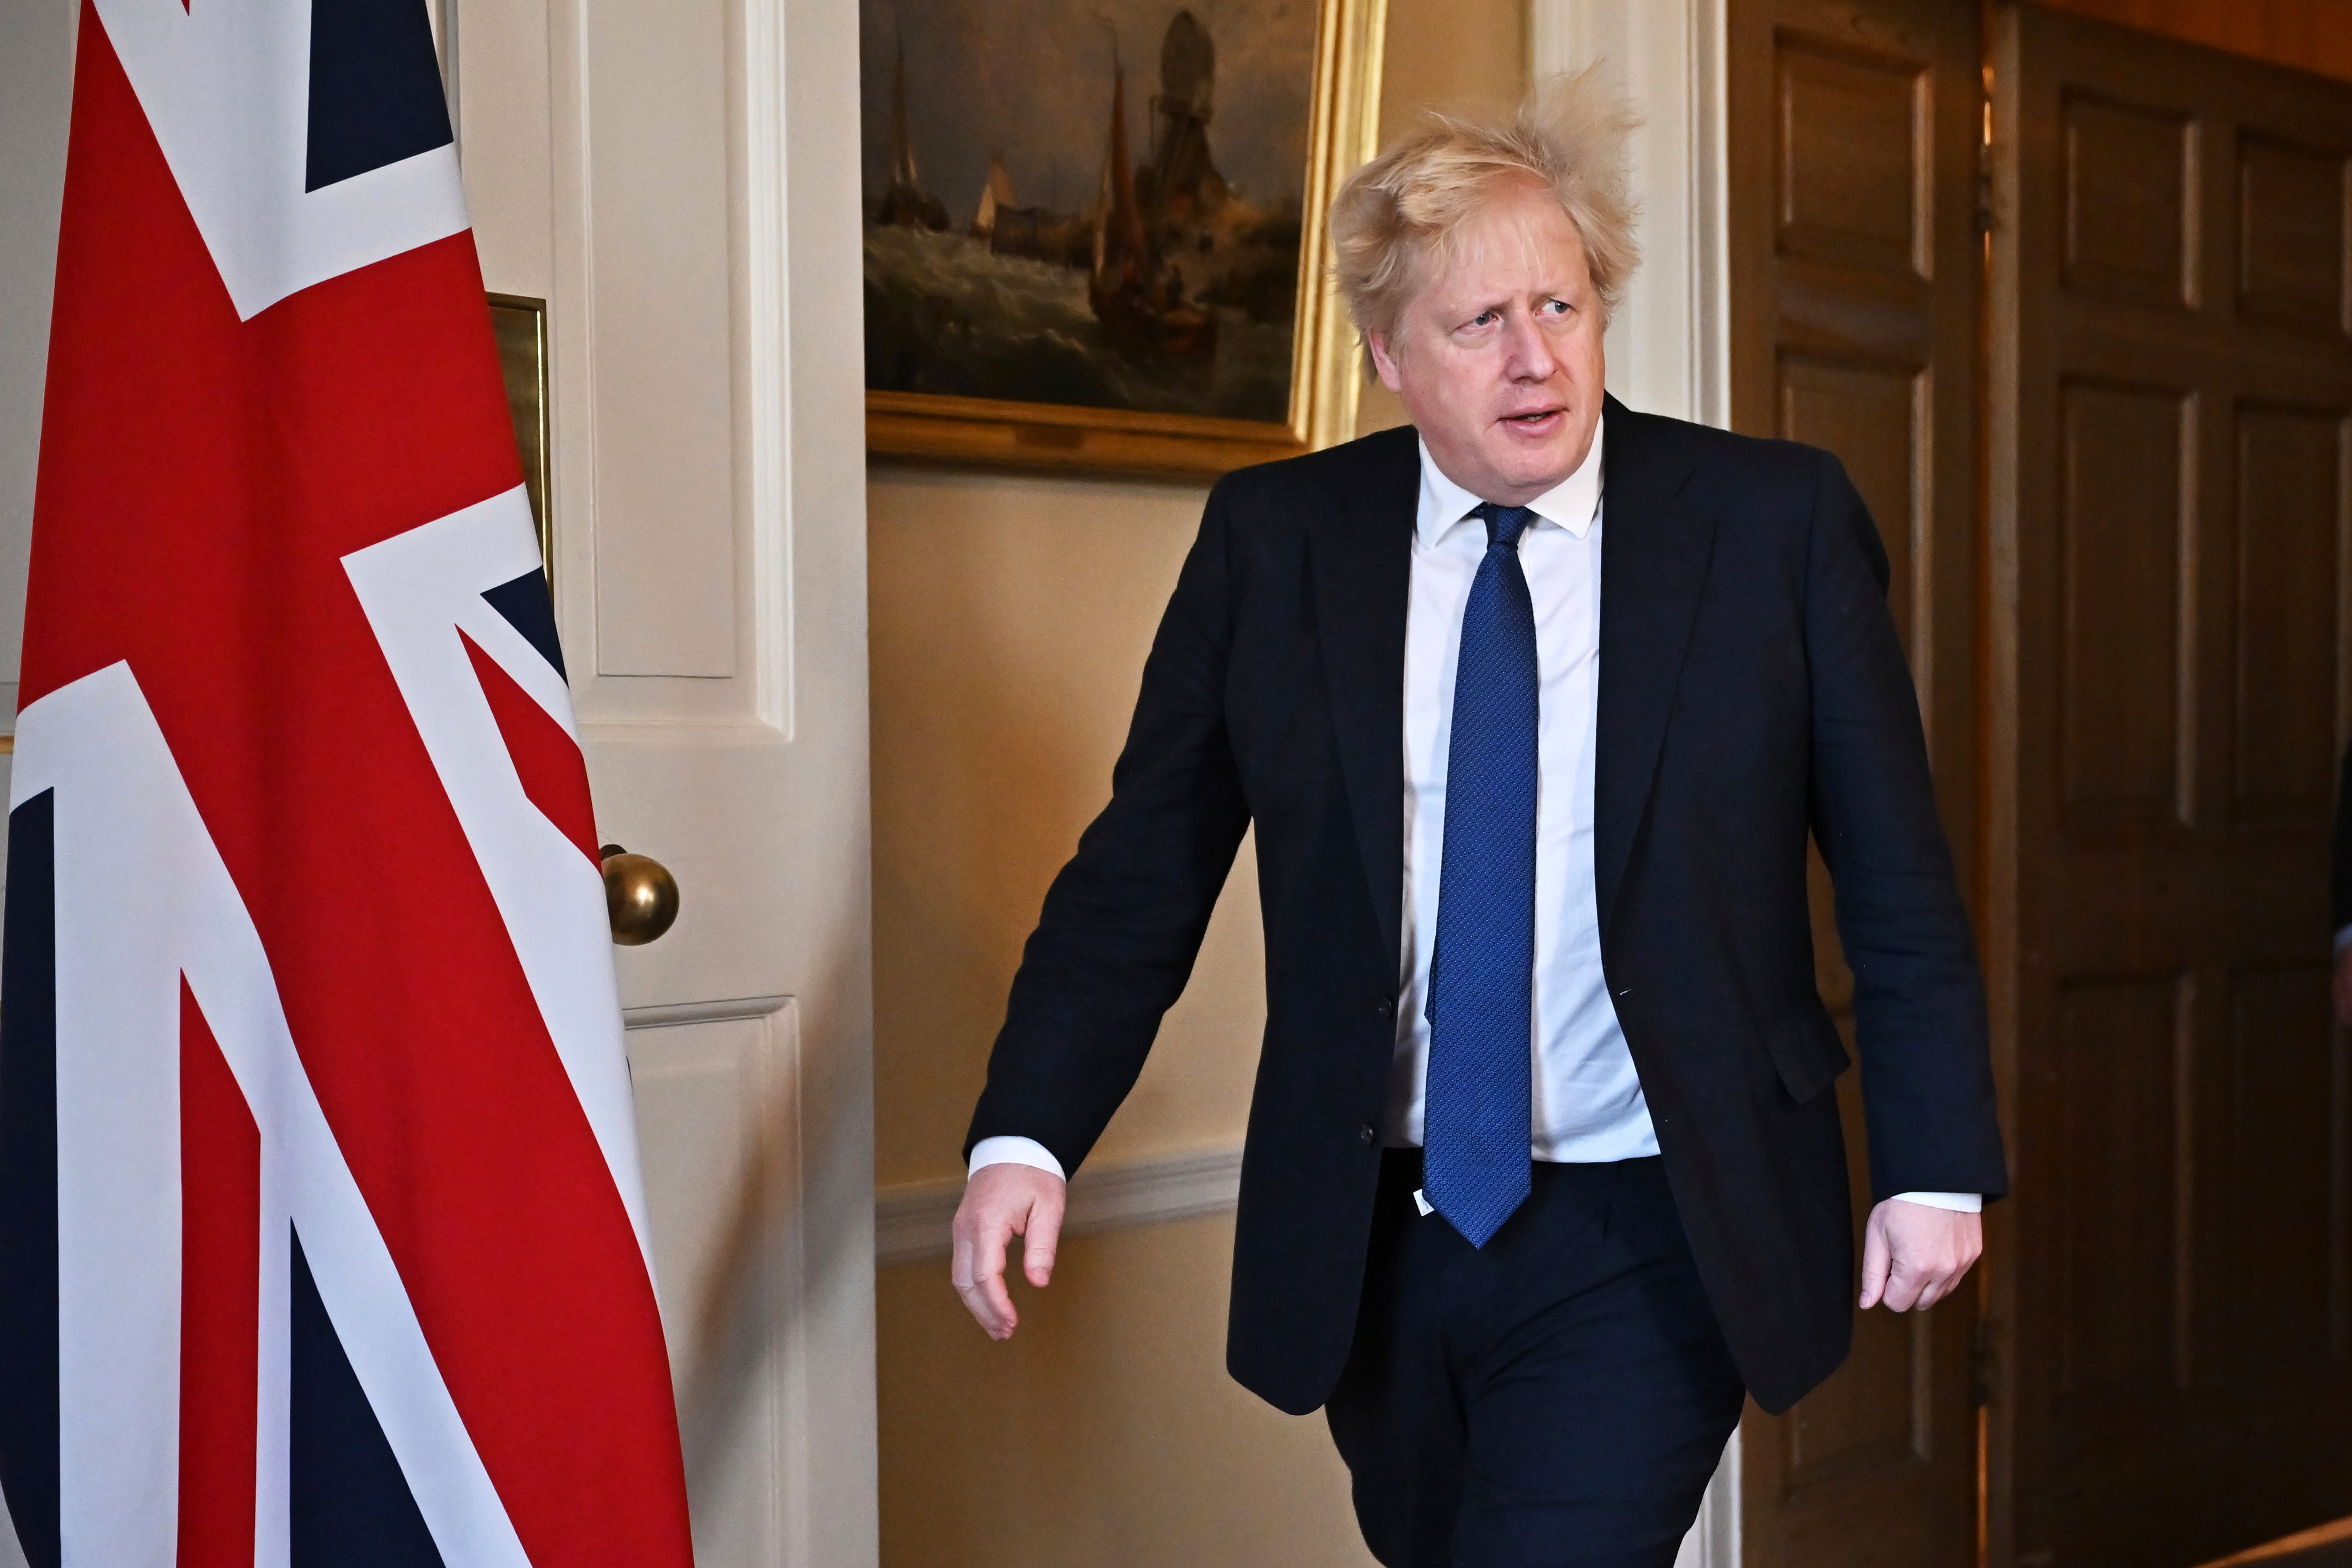 Will the damage to Mr Johnson’s reputation undermine his ability to unite the nation in the difficult days ahead?